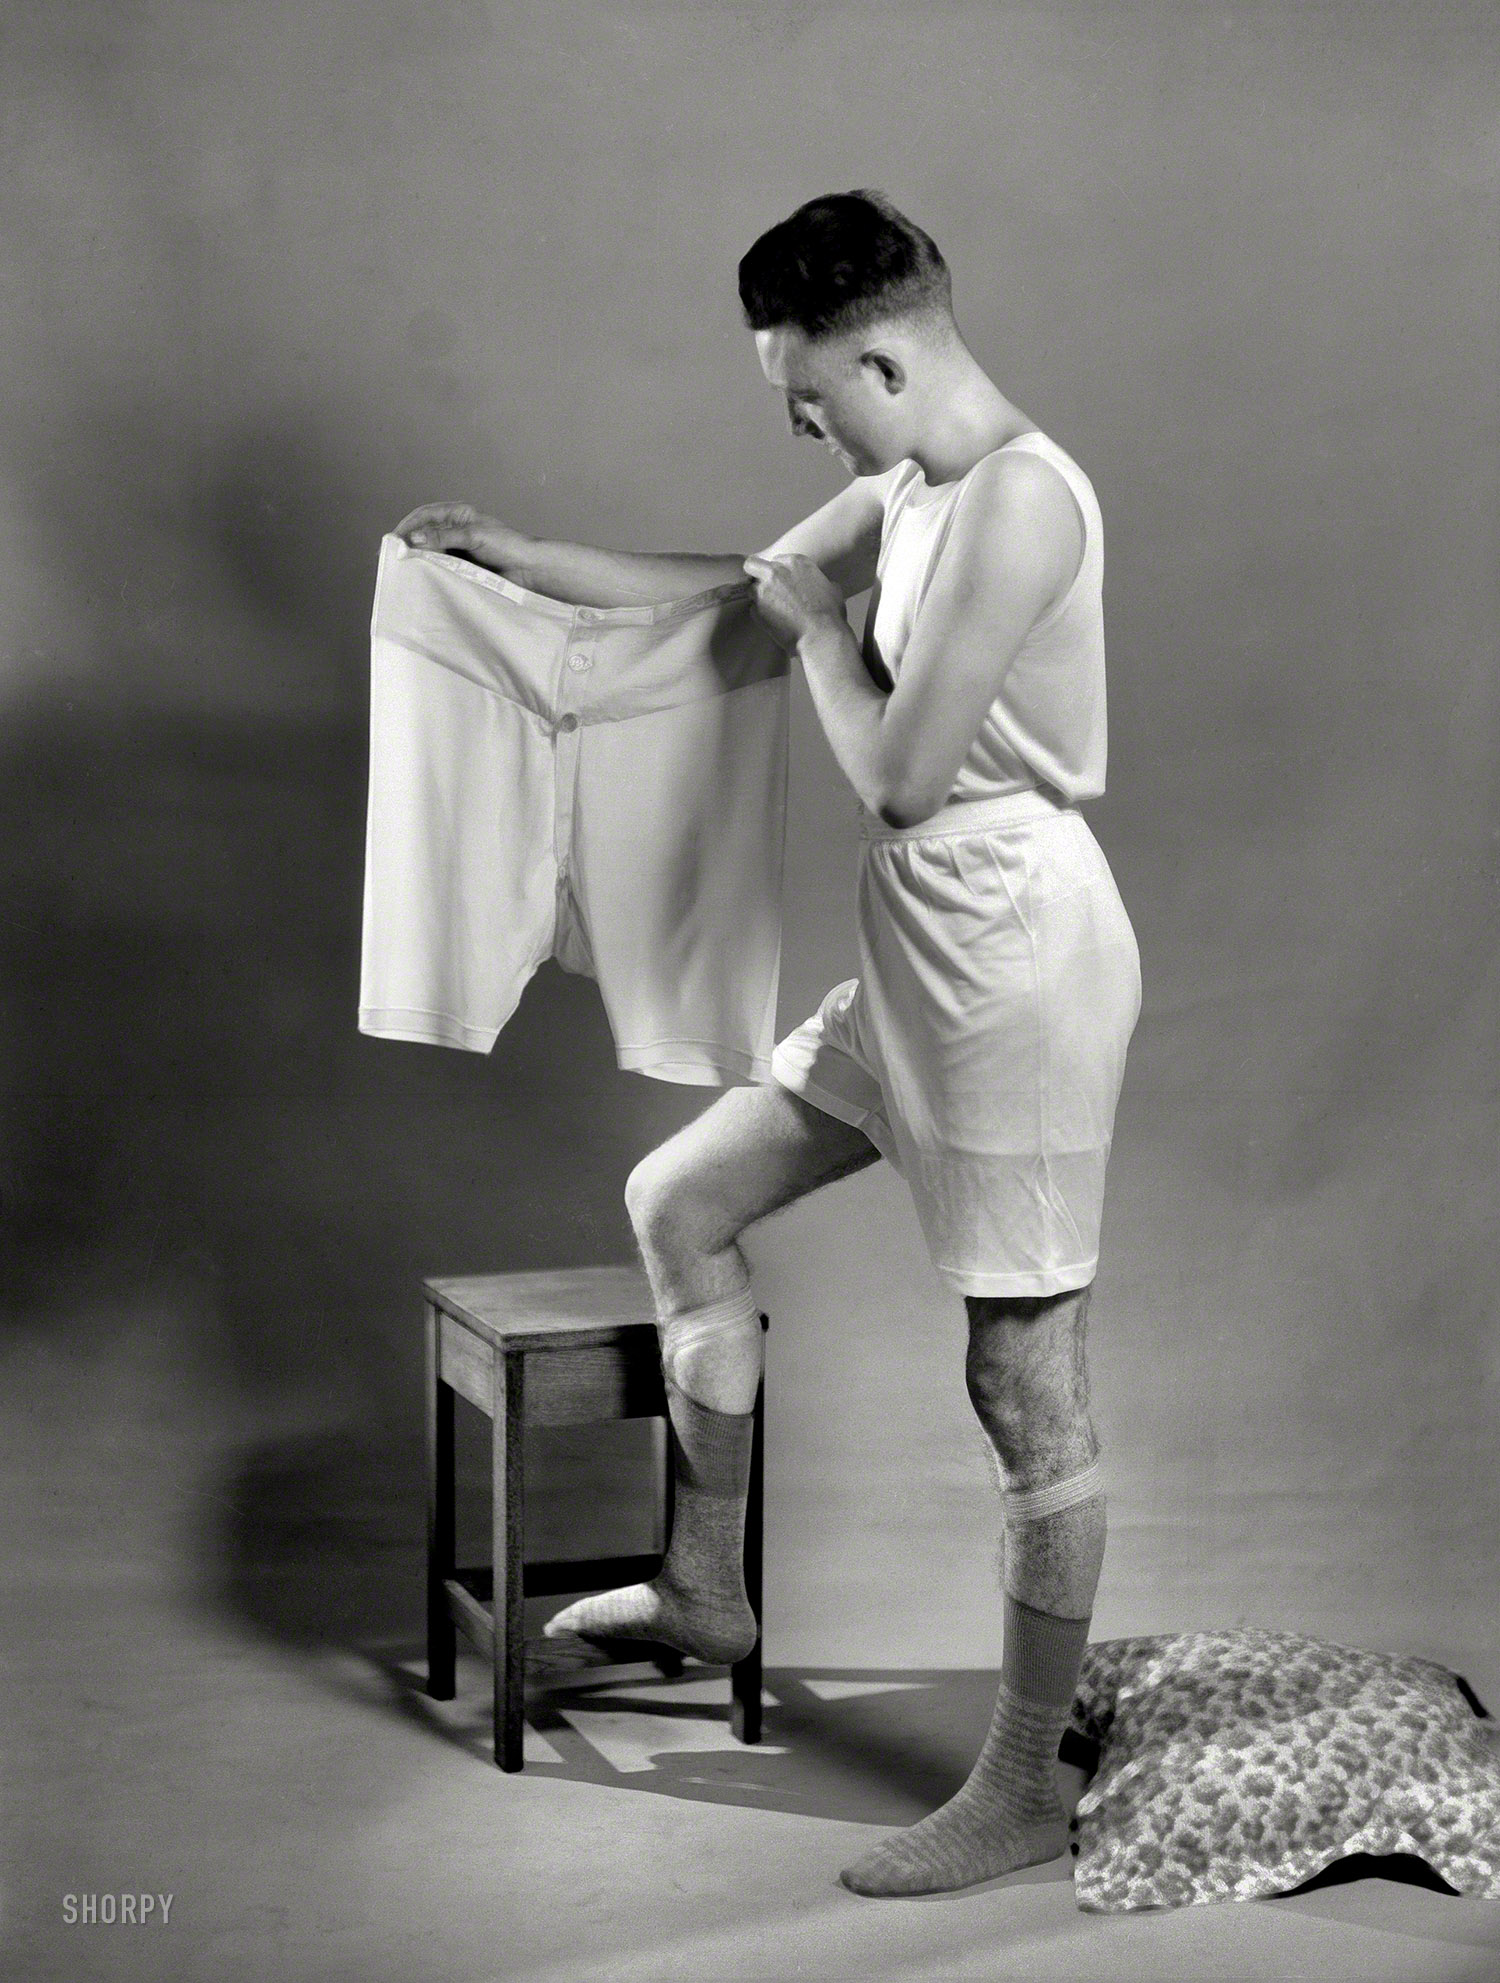 1920s. "Men's underwear." Pondering the age-old question, "Boxers or boxers?" Photo by the Gordon Burt Studio of Wellington, New Zealand. View full size.